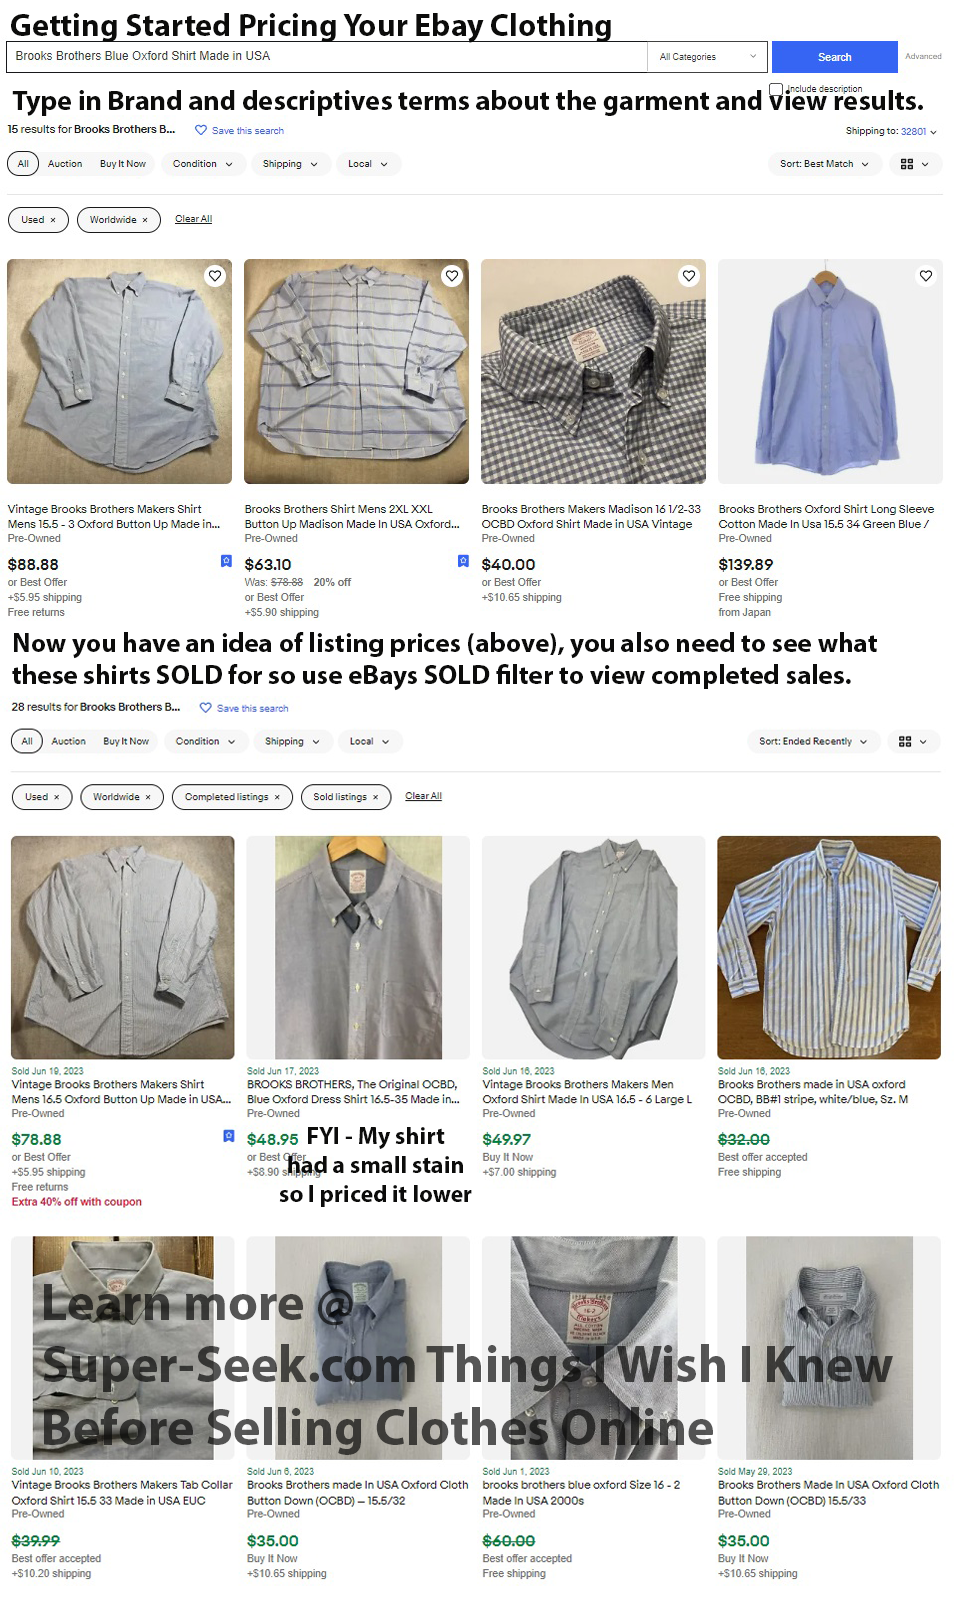 Selling Tips on How to Price Used Clothing on eBay to Get Shirts Sold